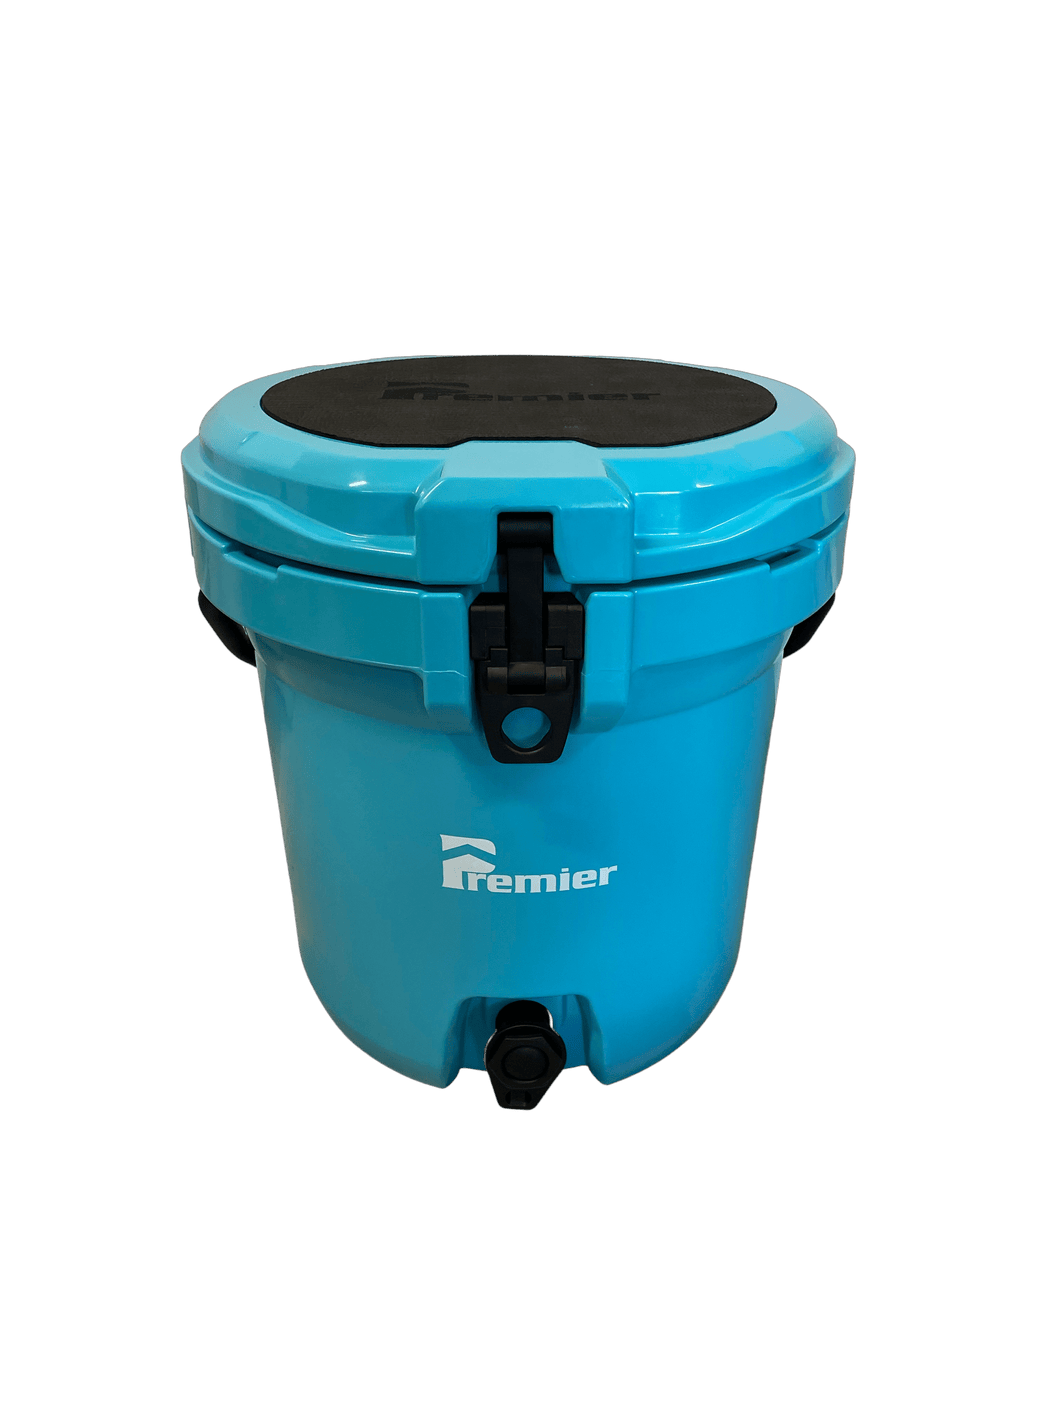 Premier 2 in 1 SUP Seat and Rotomolded 5 Gallon Cooler - Keeps Ice For 5 Days!